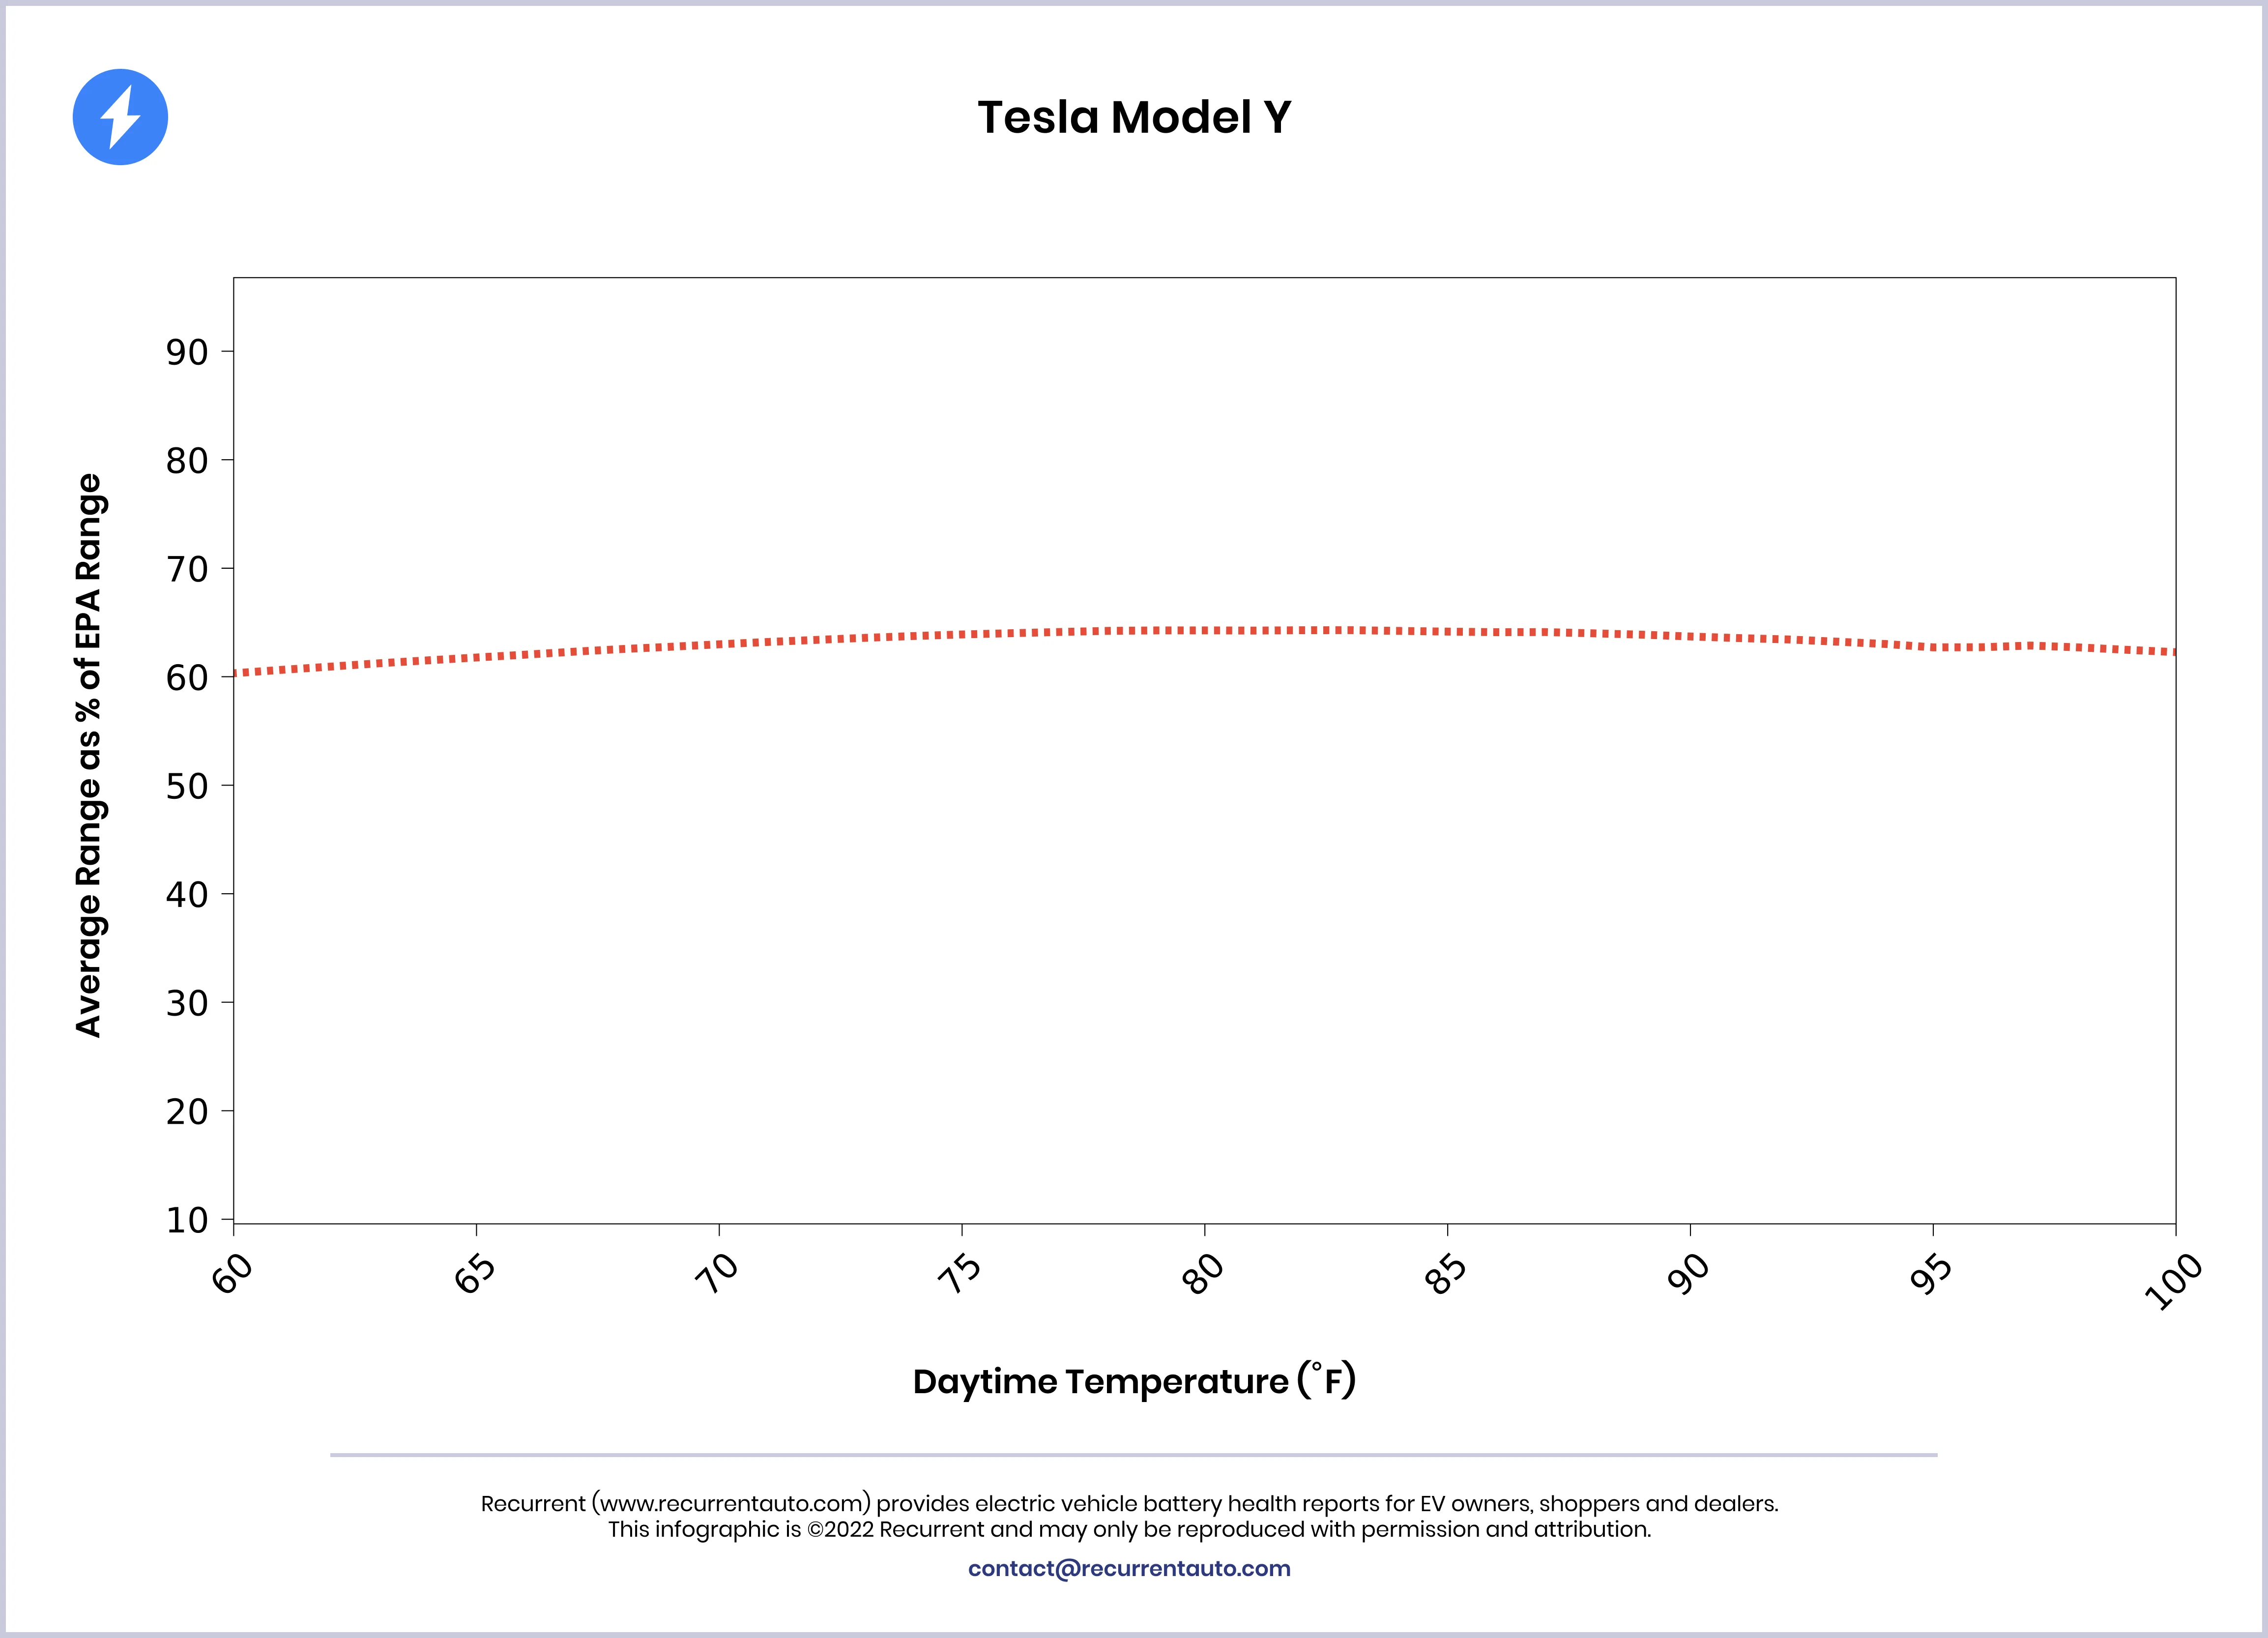 Range dependence on temperature for Model Y